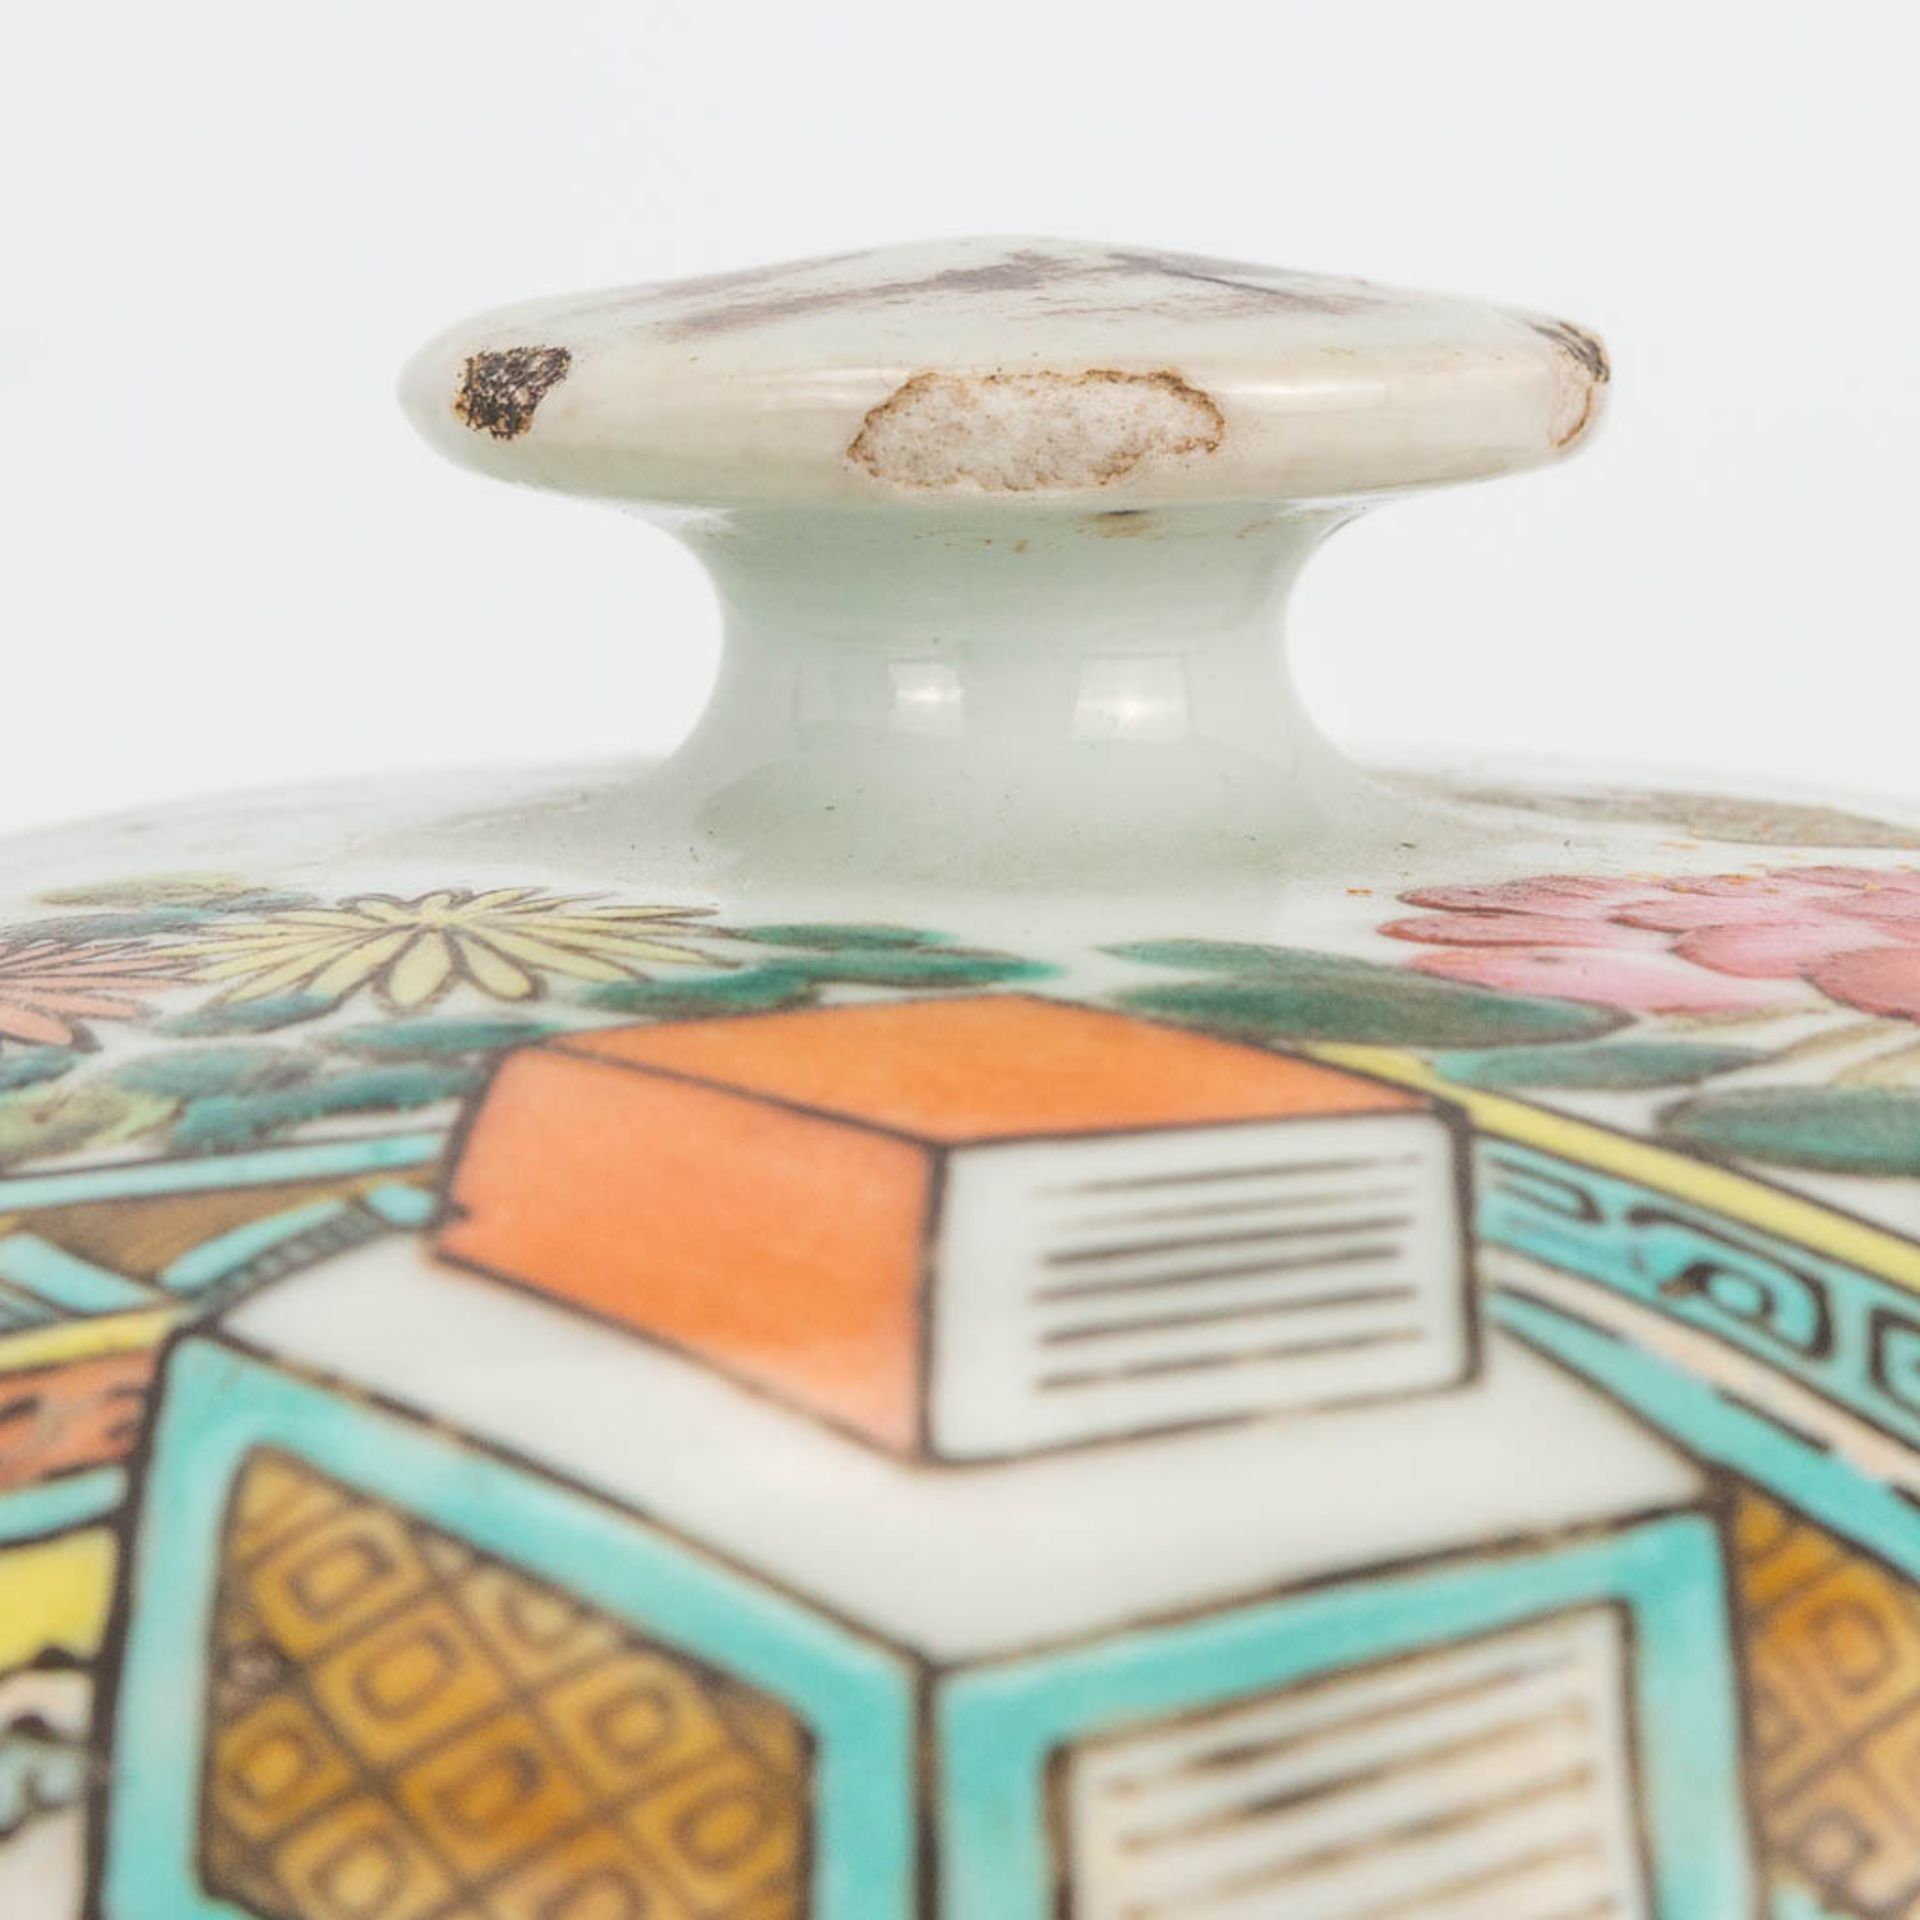 A Chinese porcelain vase with lid, decor of 100 antiquities. 19th/20th century. (43 x 27 cm) - Image 12 of 20